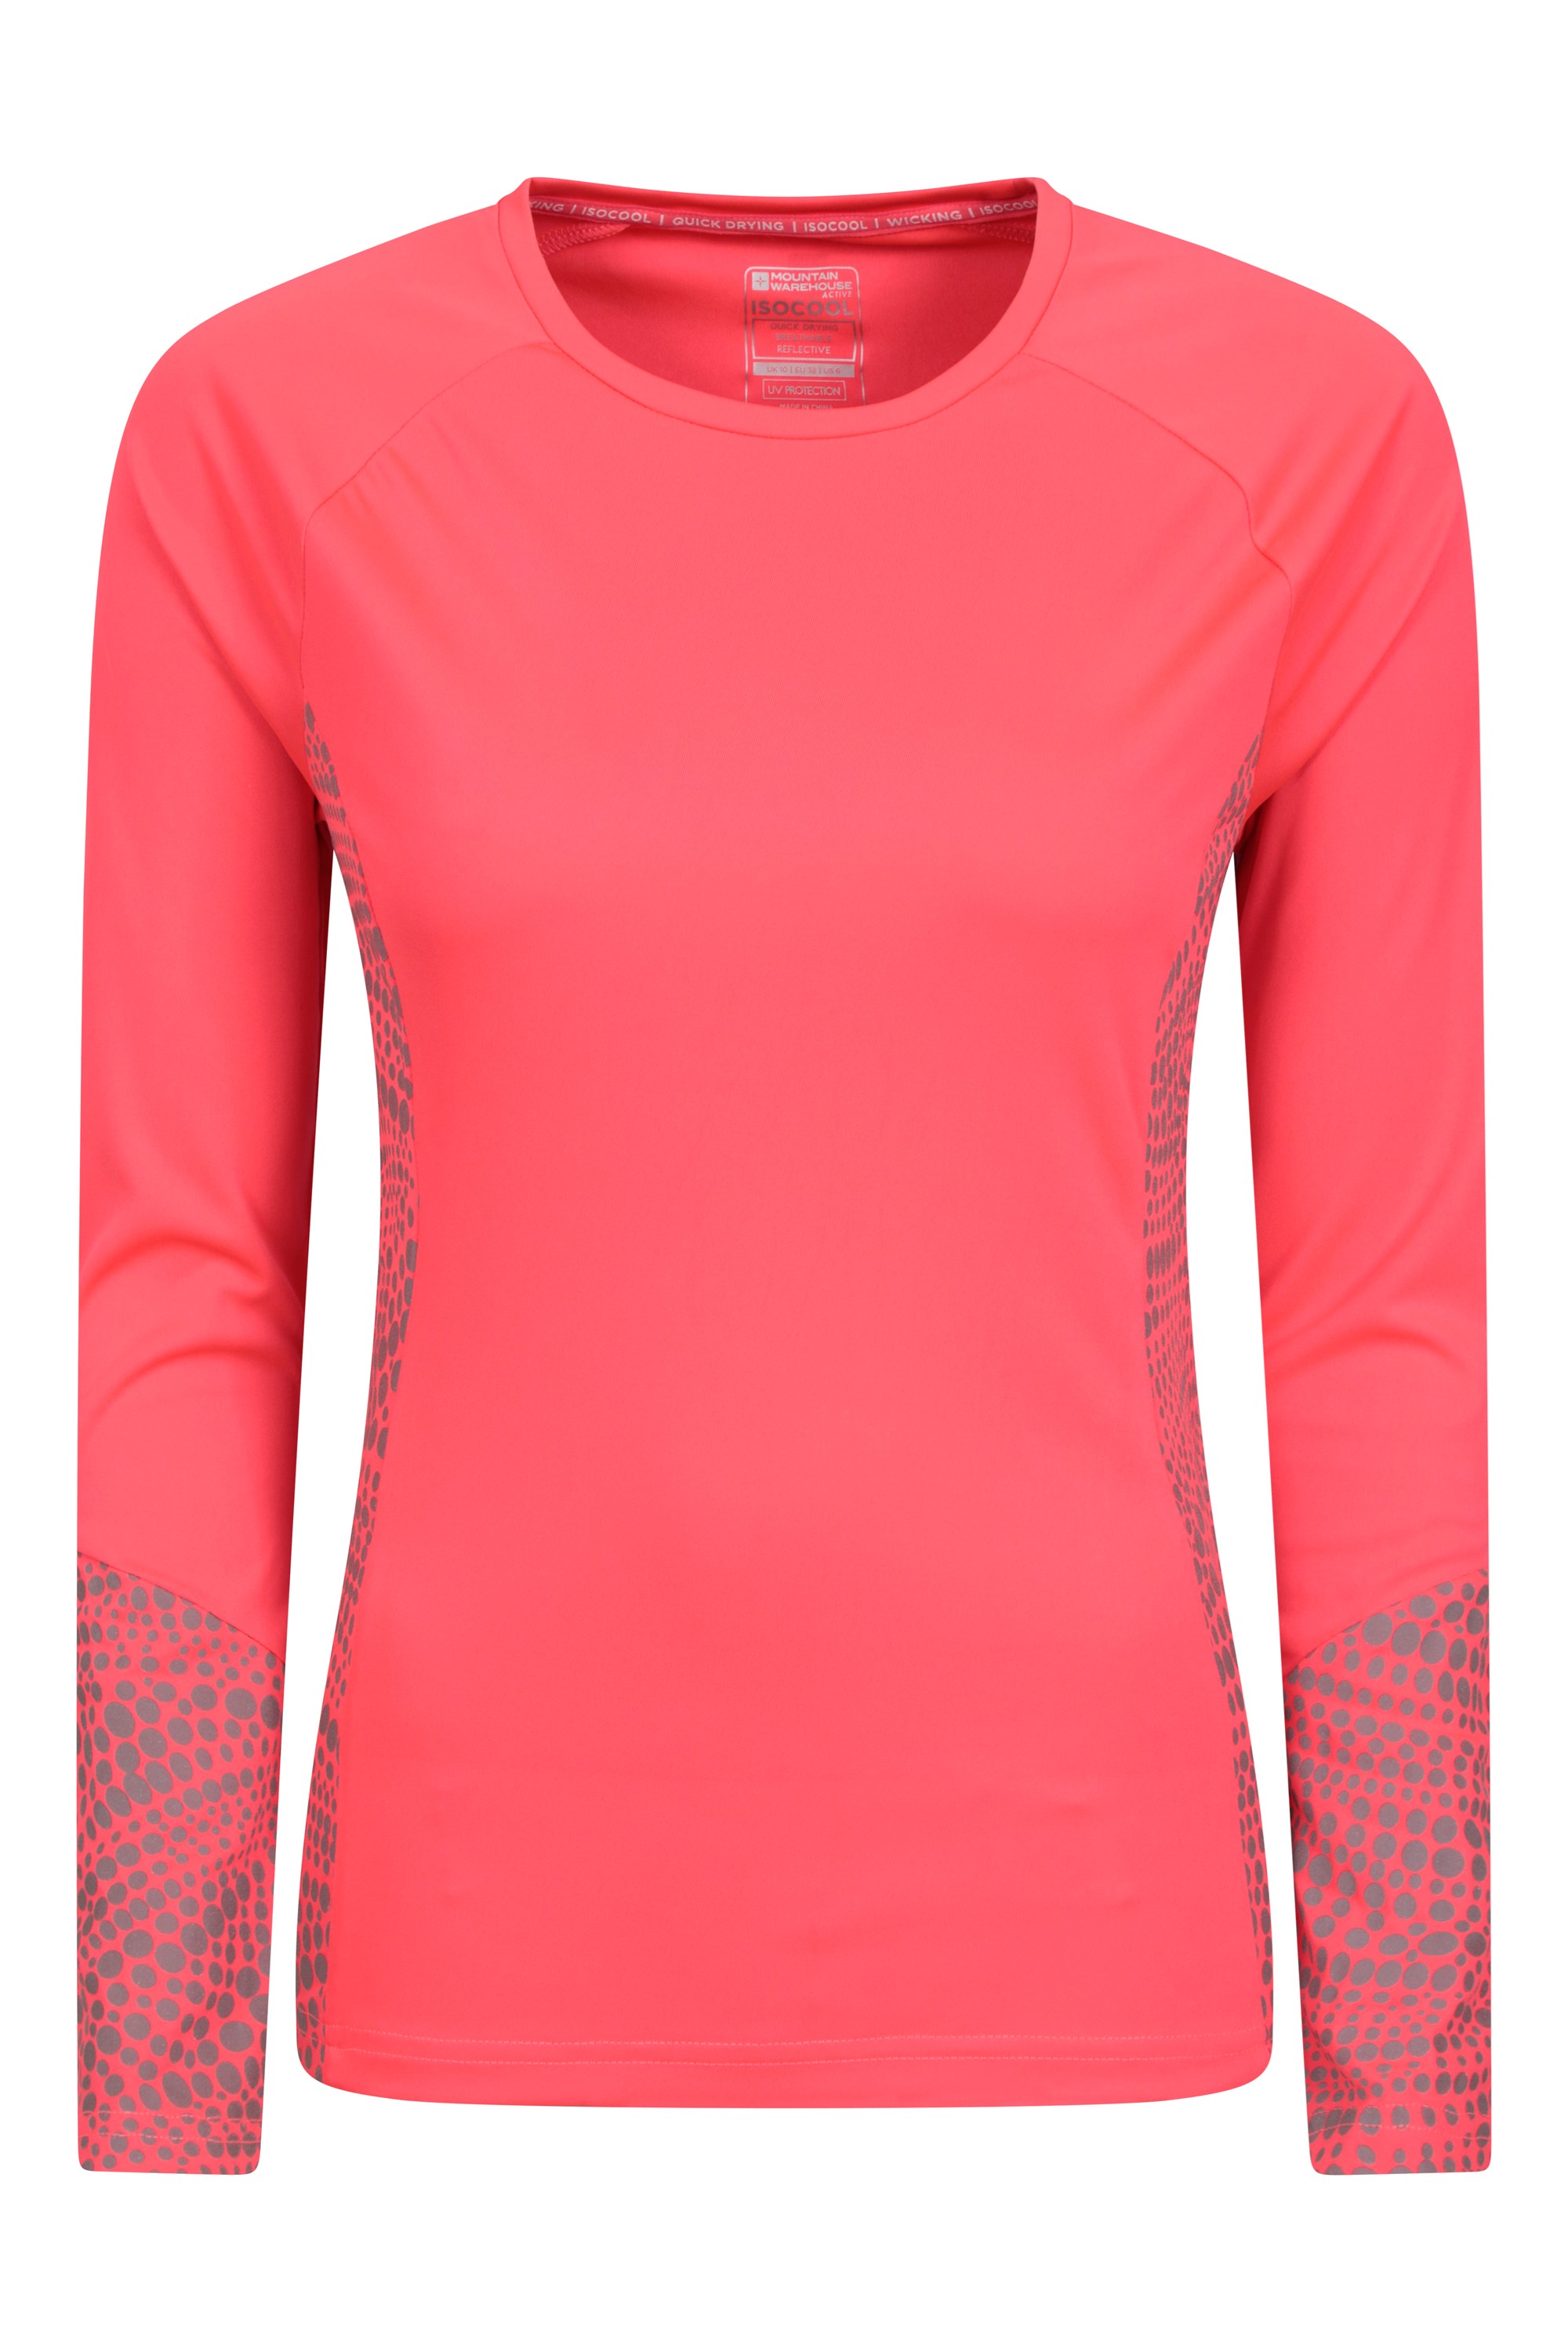 solacol Womens Tops Casual Womens Tops Long Sleeve Long Sleeve